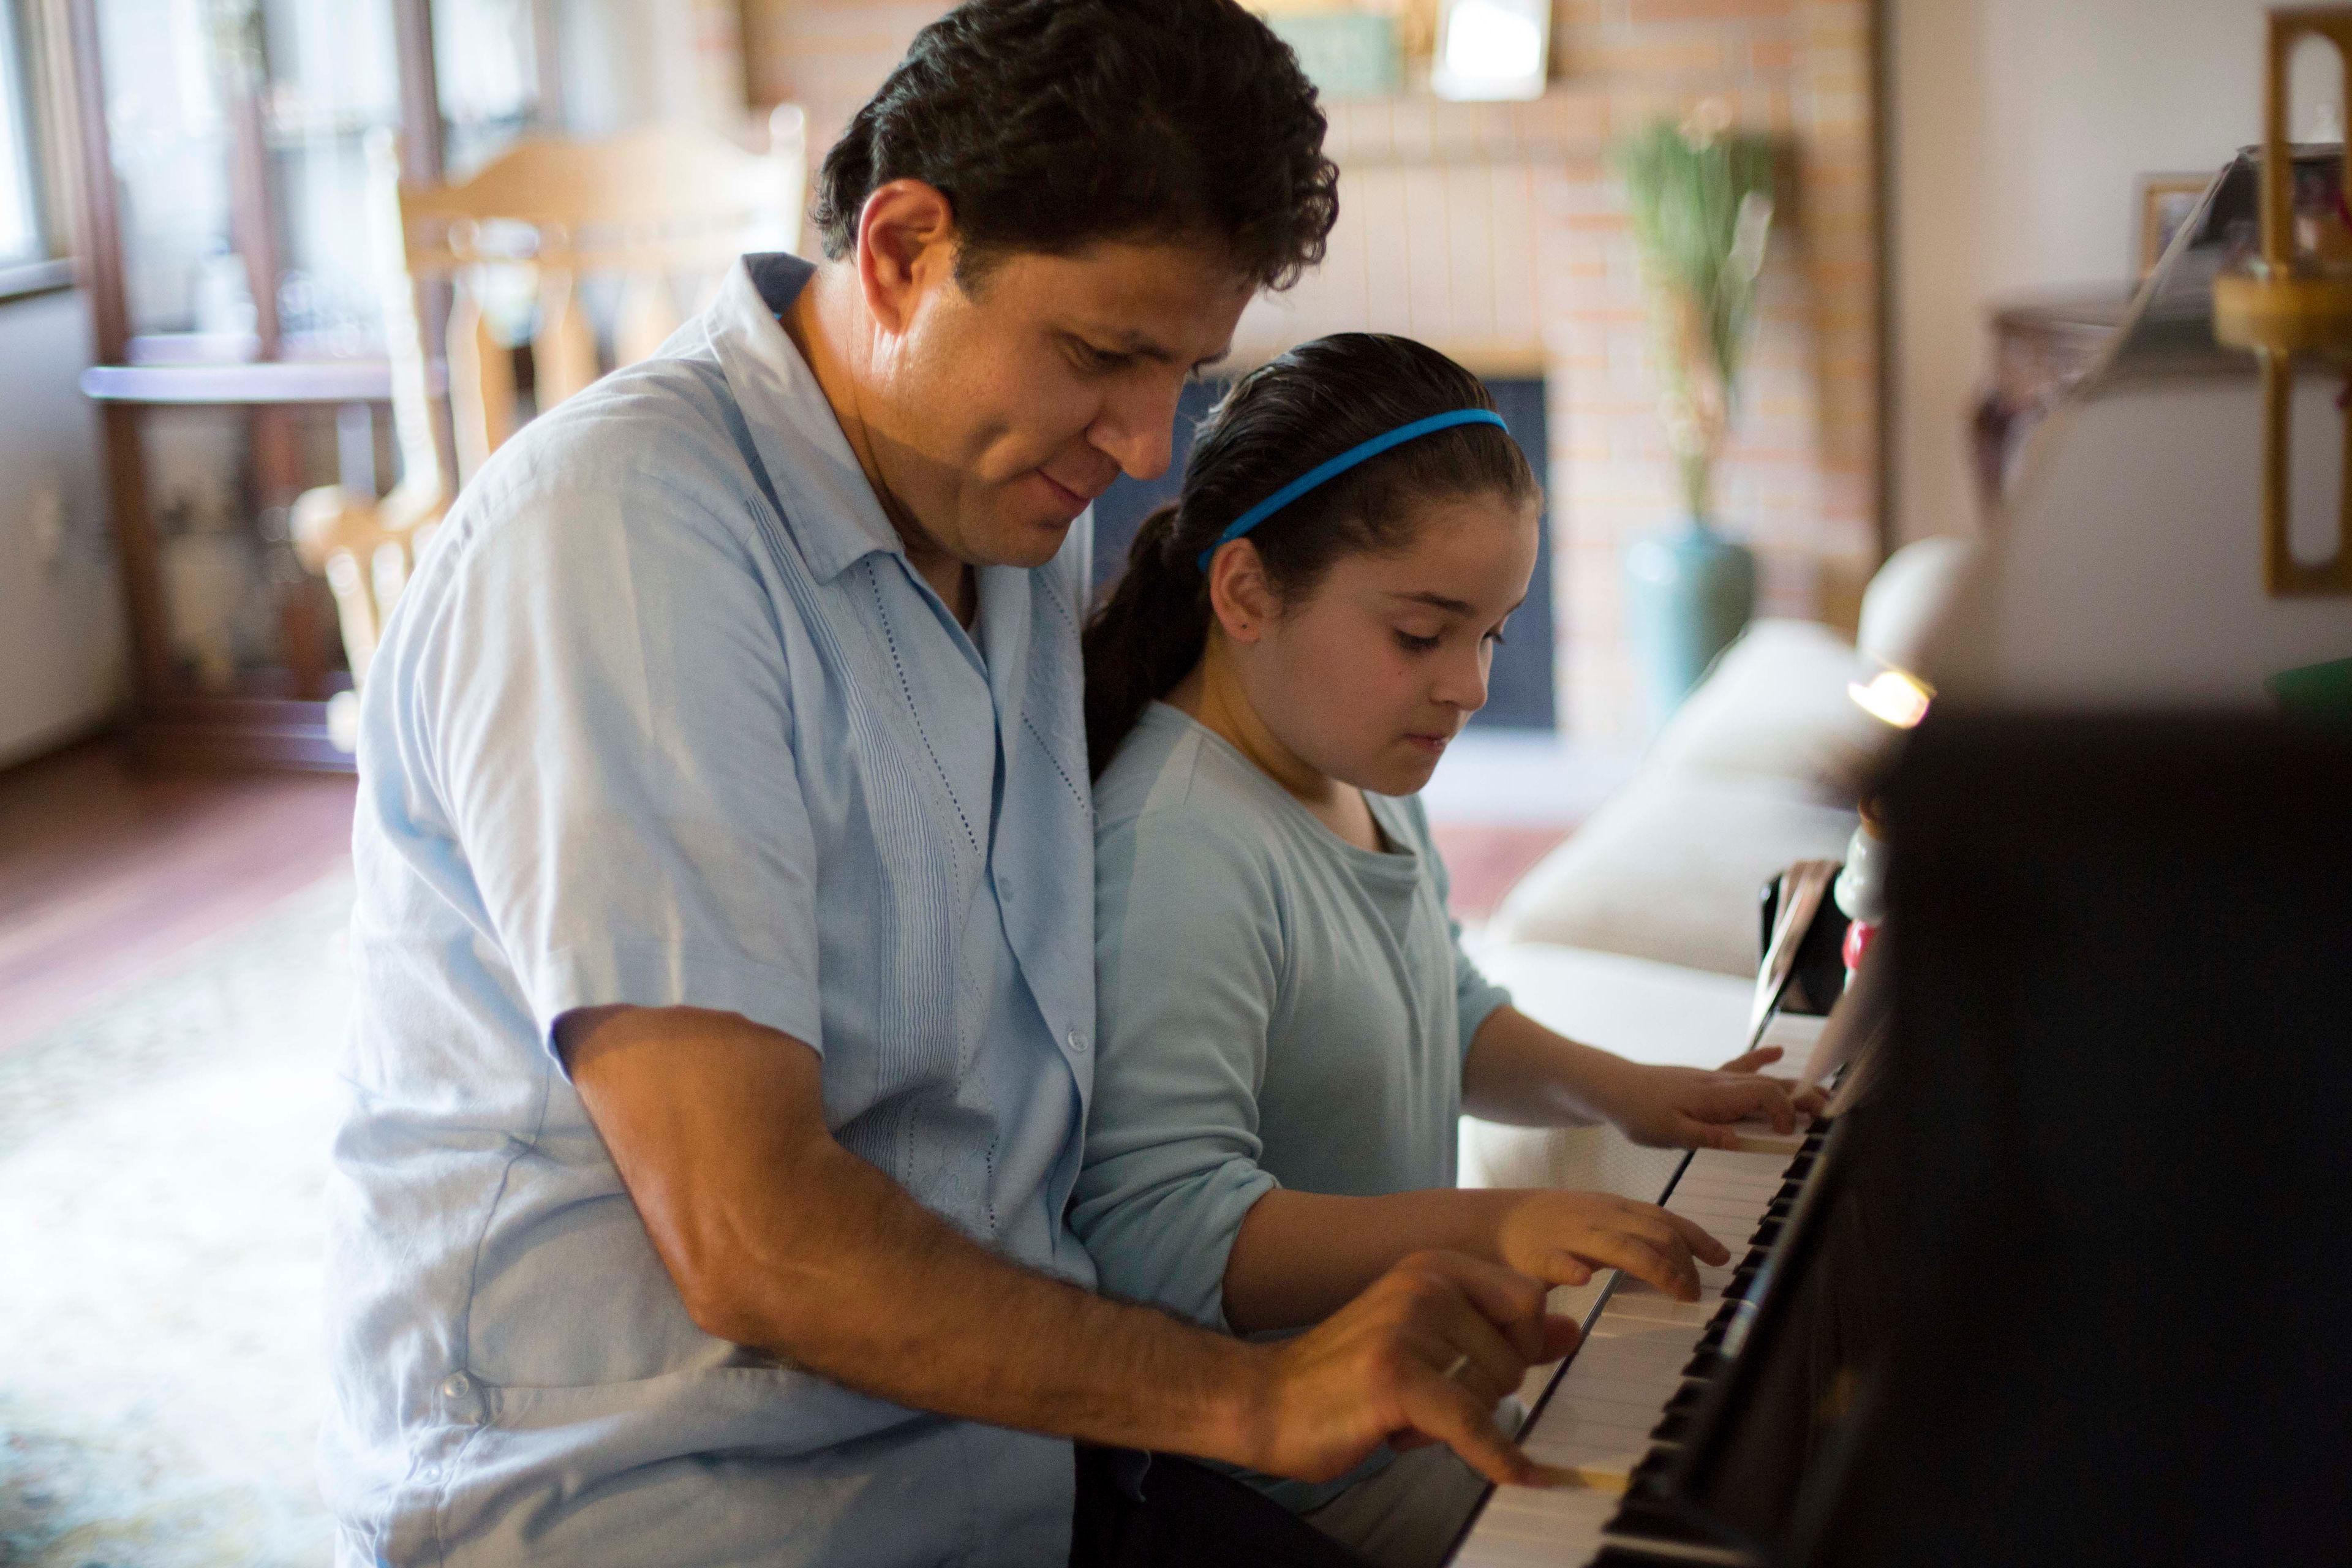 A father plays the piano with his daughter.